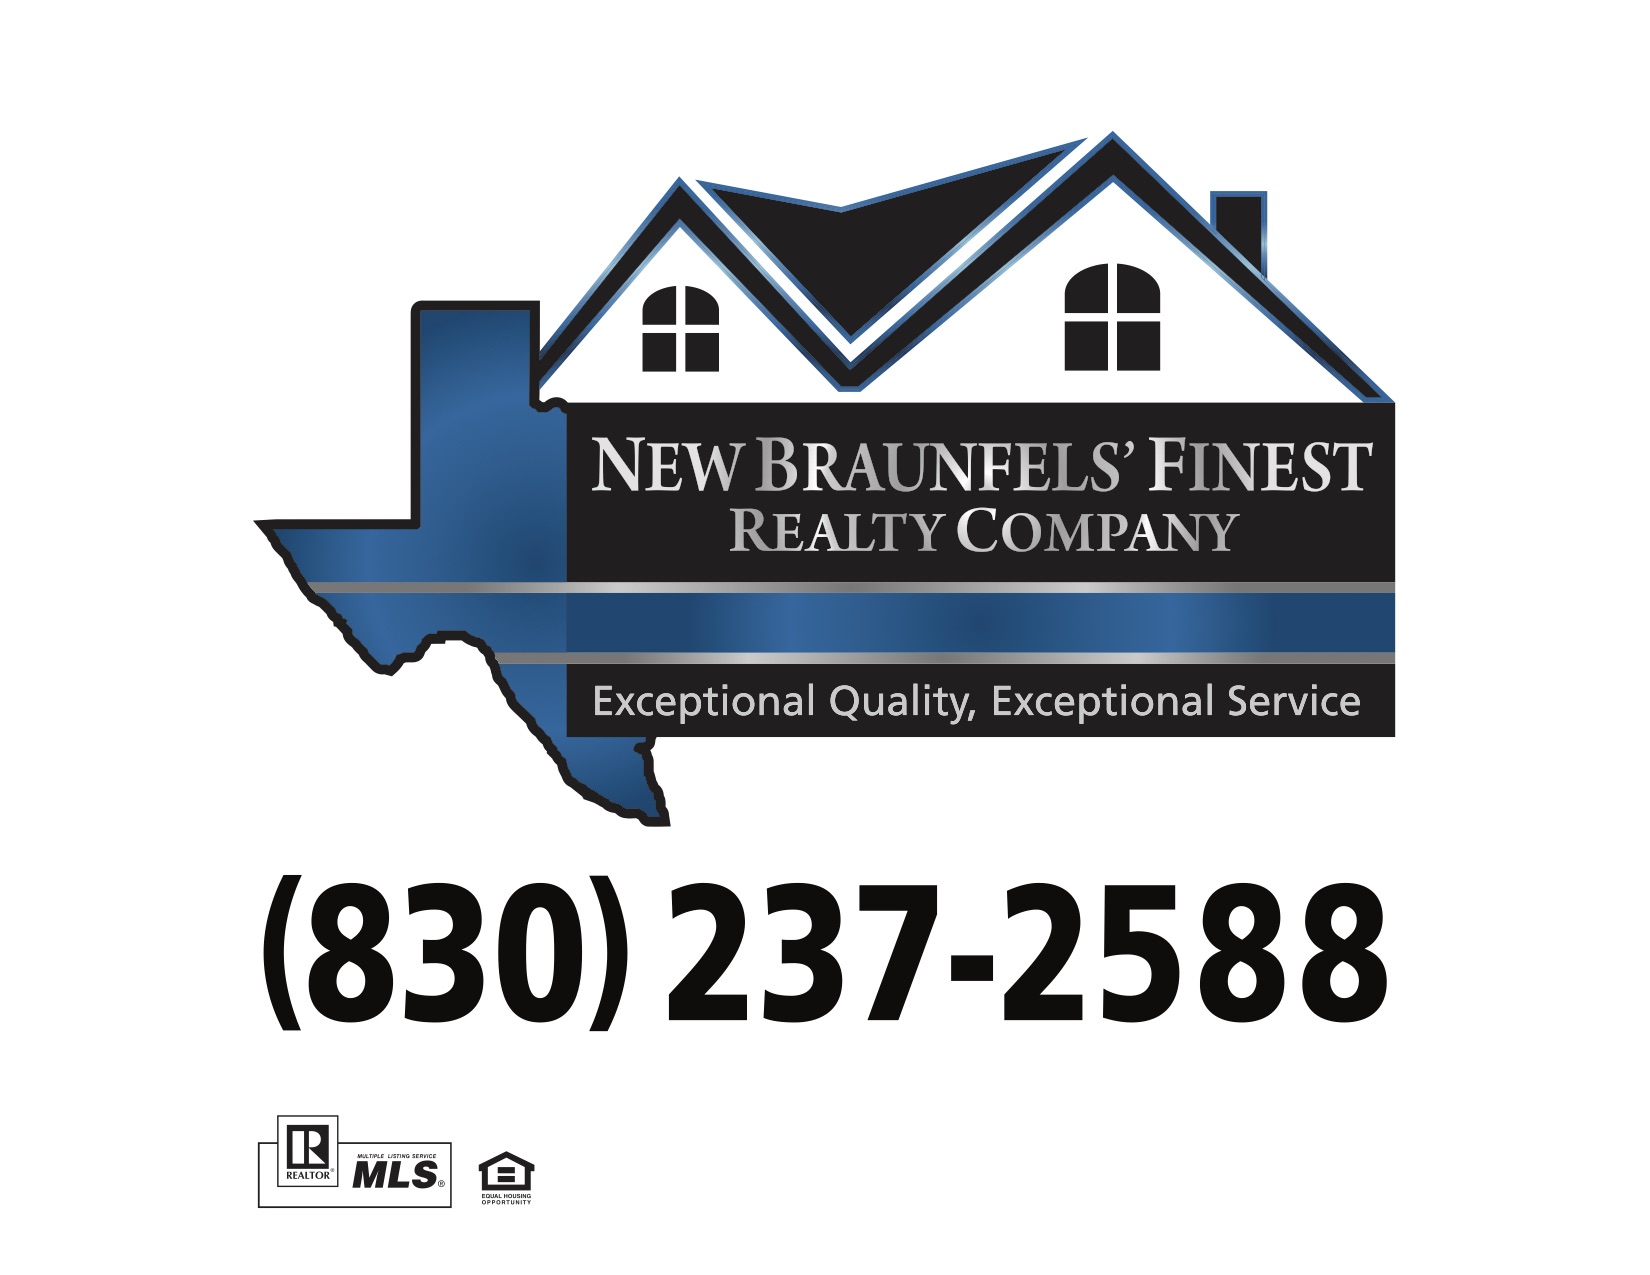 NB Finest RC 24x24 SIgn 2